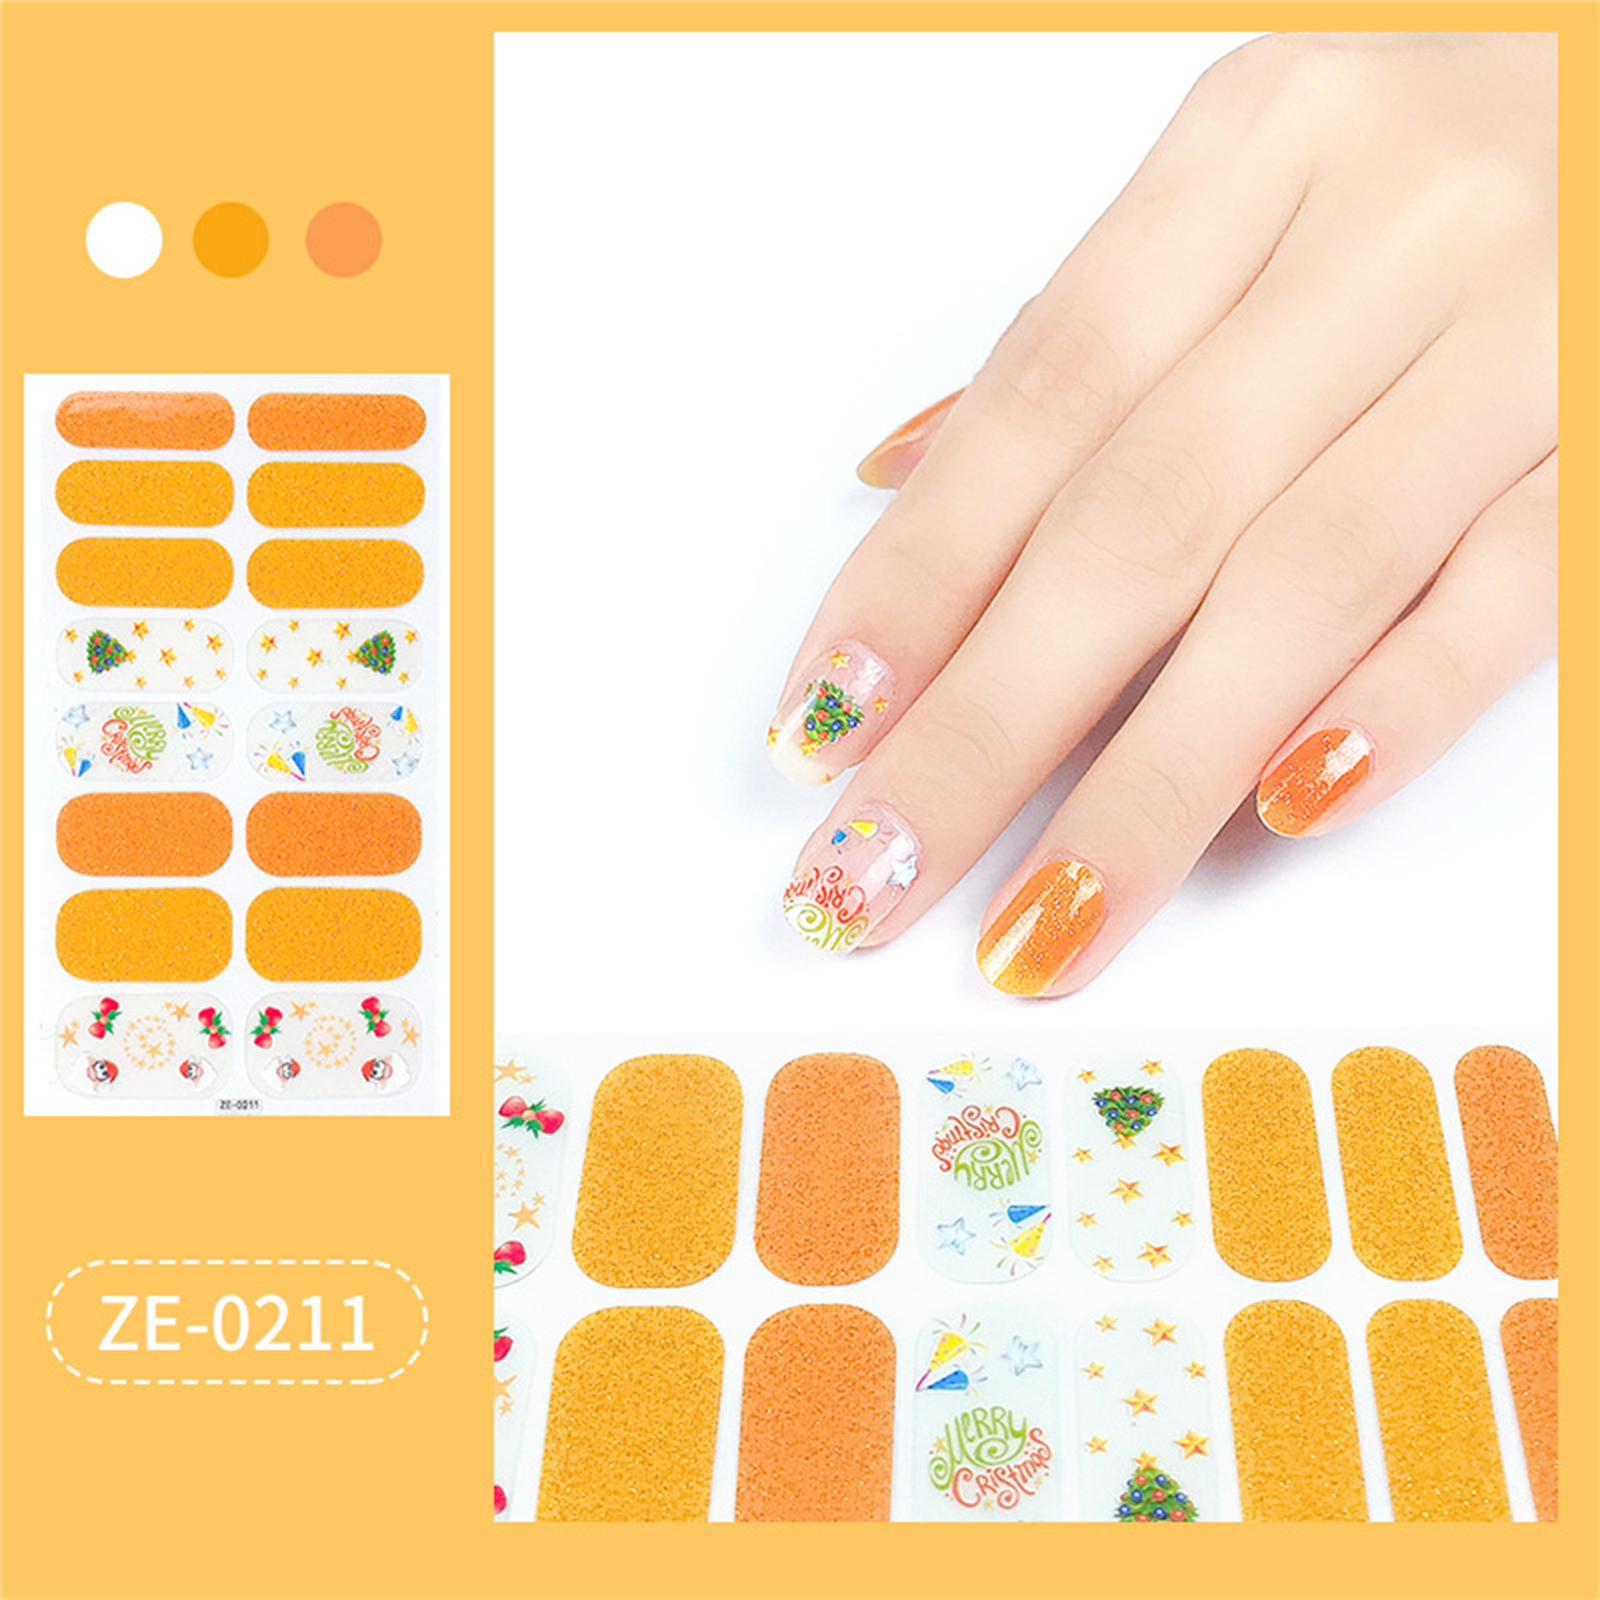 Tejiojio HoliDay Home Trends 16 Strips Semi-Cured Gel Nail Stickers Set for UVlamp Designer 3 Dimensions Nail Polish Fashion Gel Nail Art Stickers - image 1 of 2